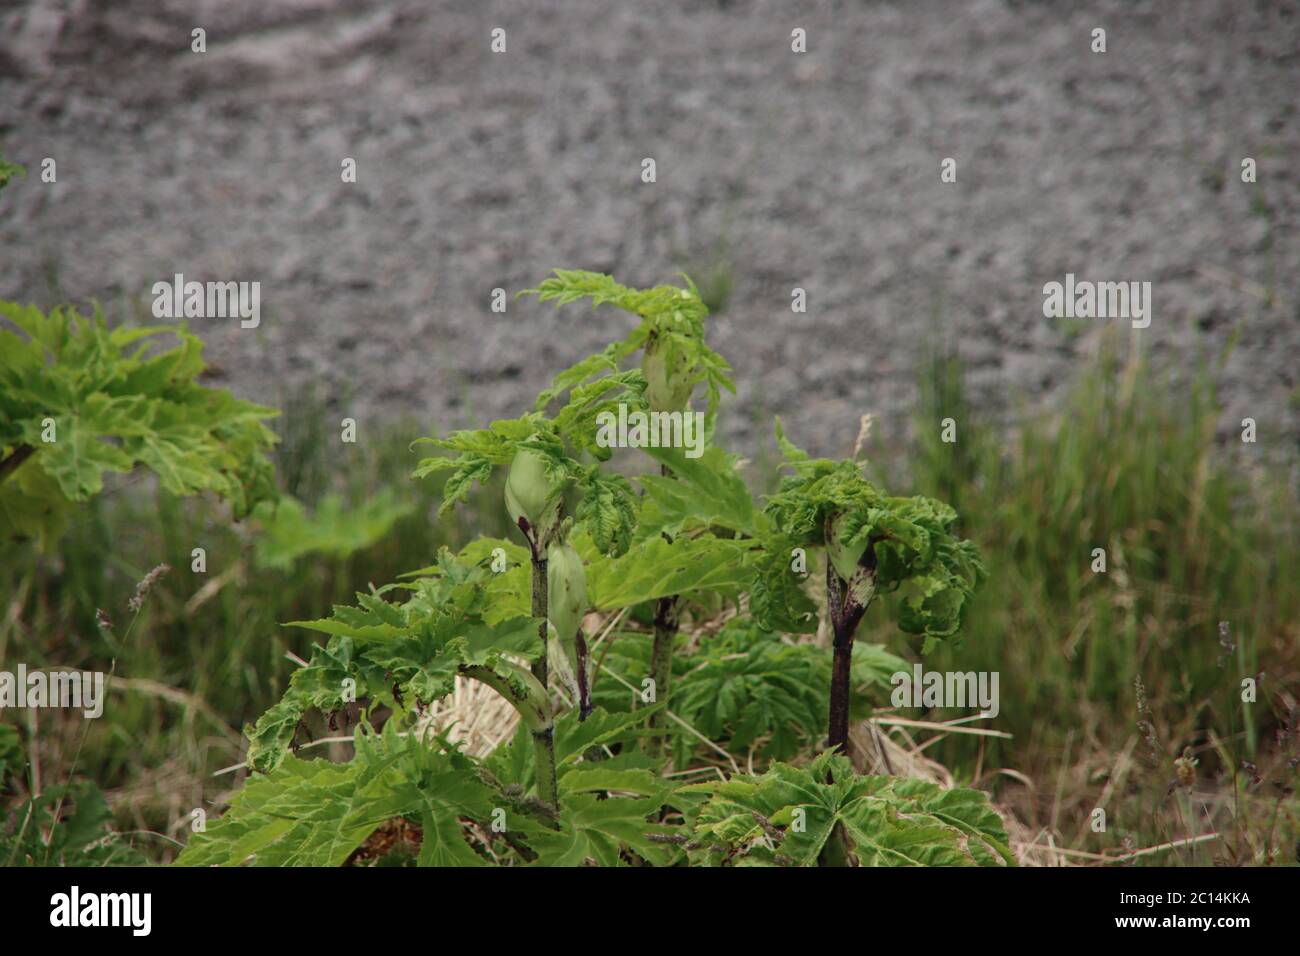 Hogweed plant which is dangerous for people when skin is toched Stock Photo